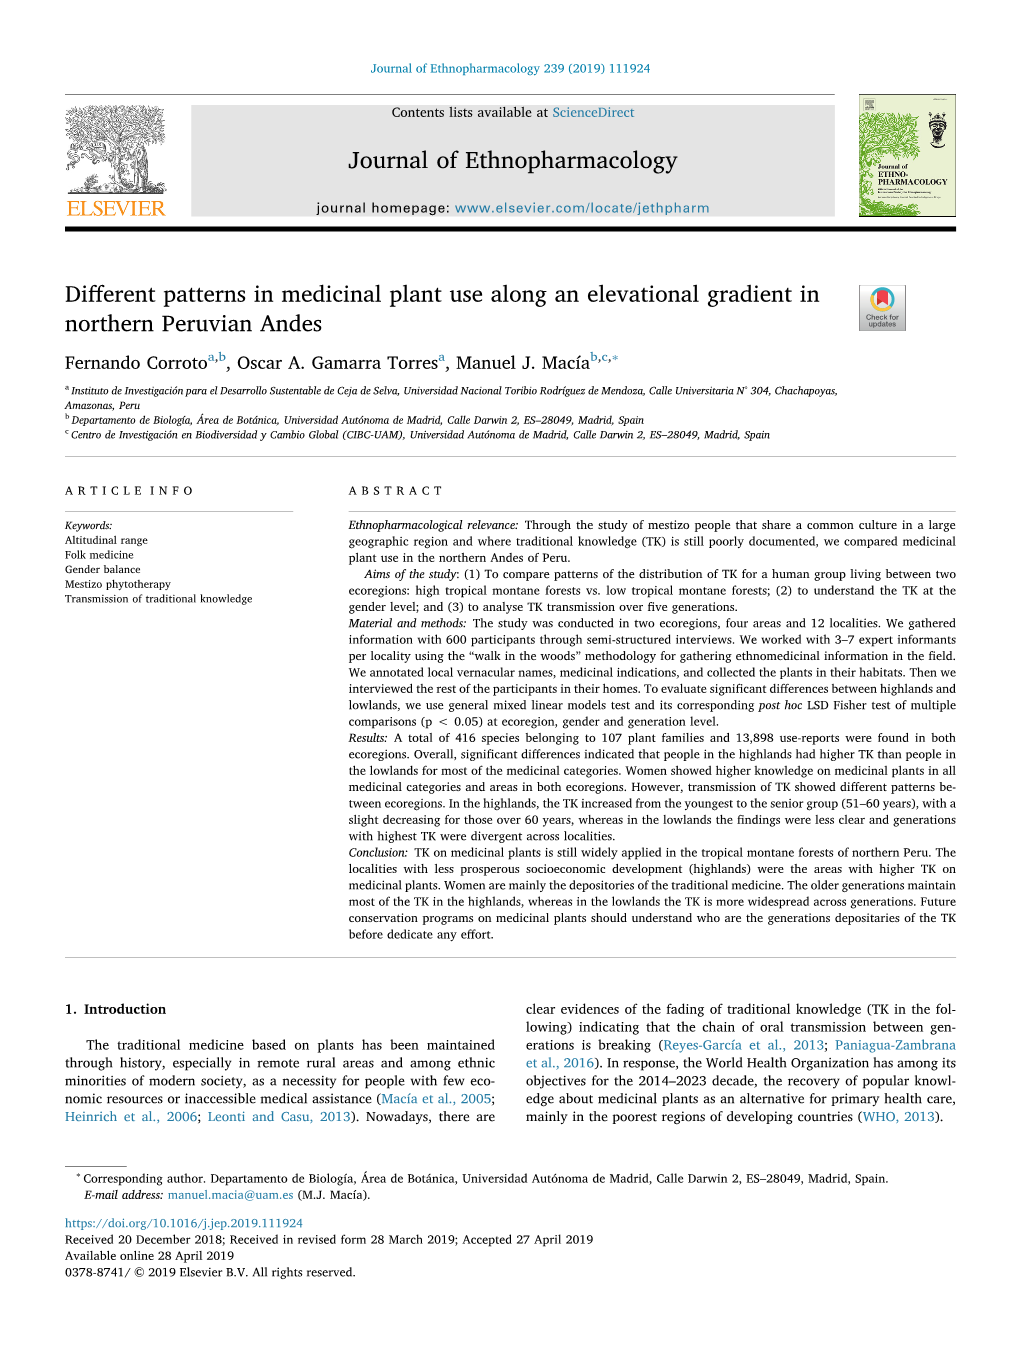 Different Patterns in Medicinal Plant Use Along an Elevational Gradient In